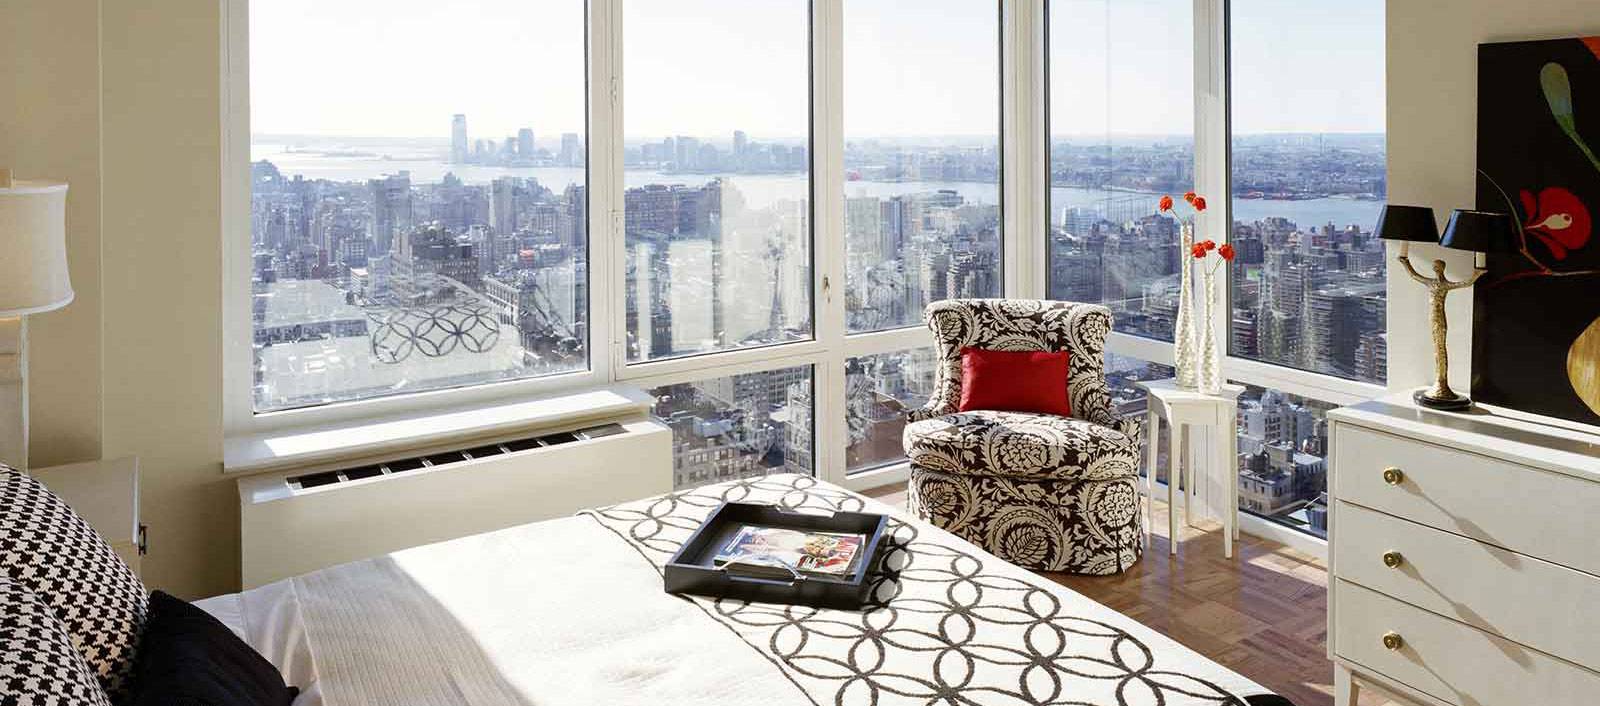 7 Star Ultra luxury -Penthouse 63 floor- Floor-to-Ceiling Windows-Custom Bathroom~Built-in Washer and Dryer-- Swimming Pool-Actual Apt Pictures--FOR PRIVATE VIEWING 646 483 9492